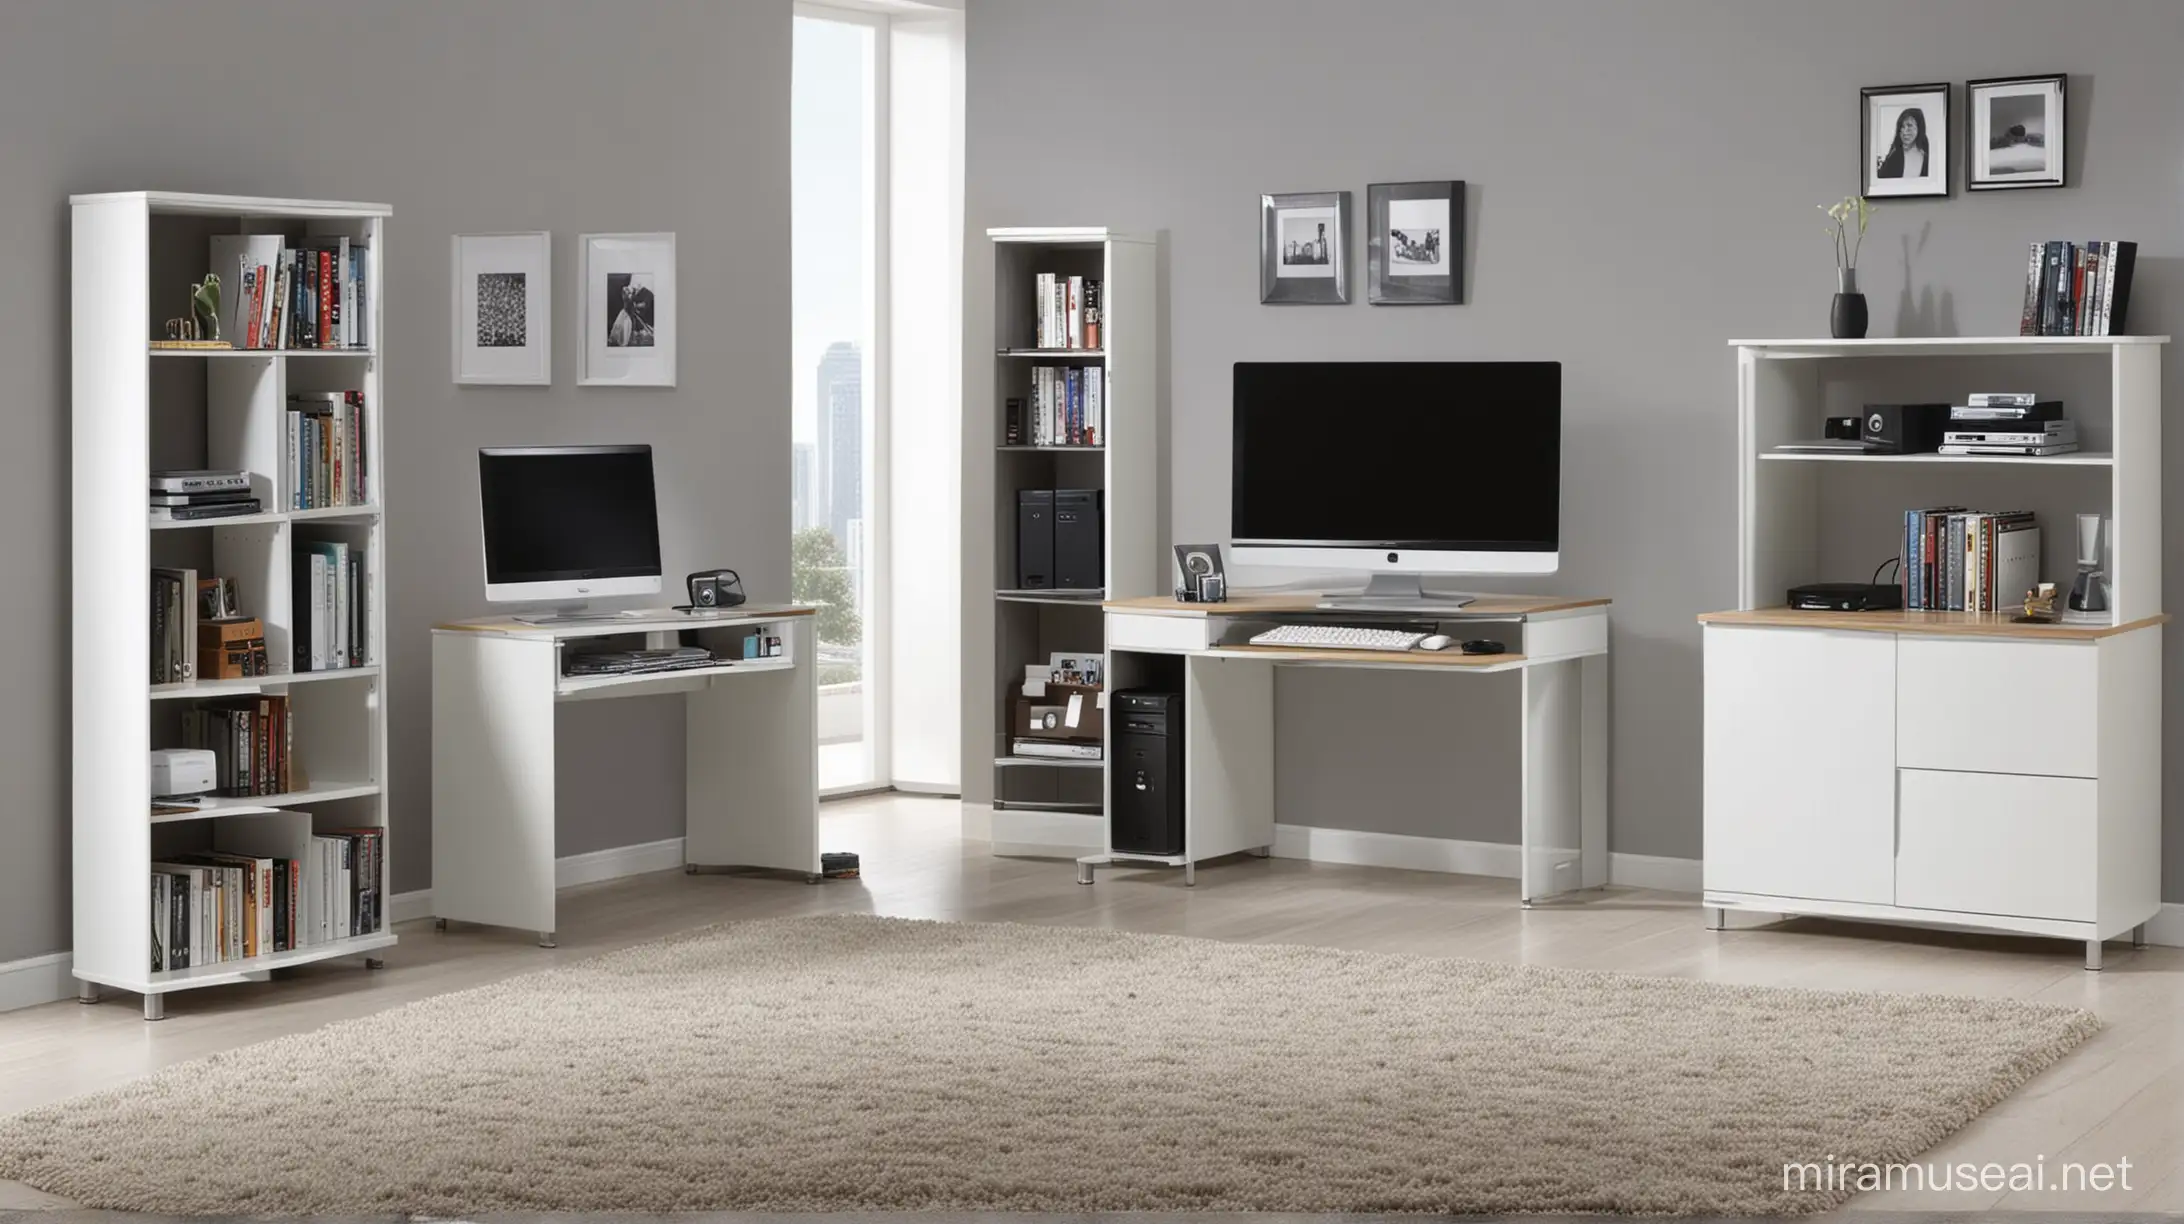 Create a wide room with computer furniture set